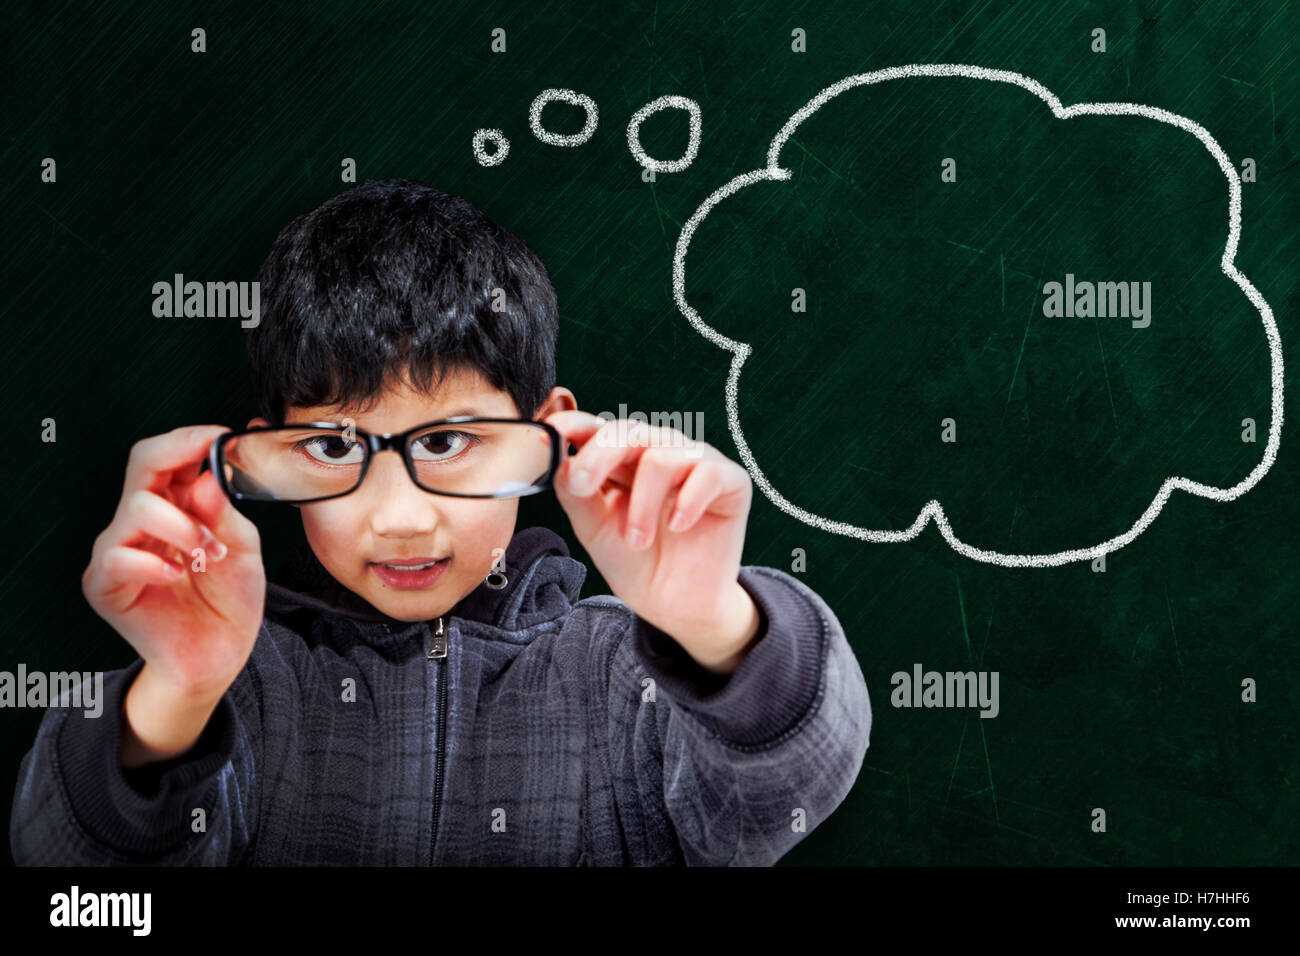 Smart Asian boy holding up eyeglasses on chalkboard background with thought bubble and copy space. Stock Photo